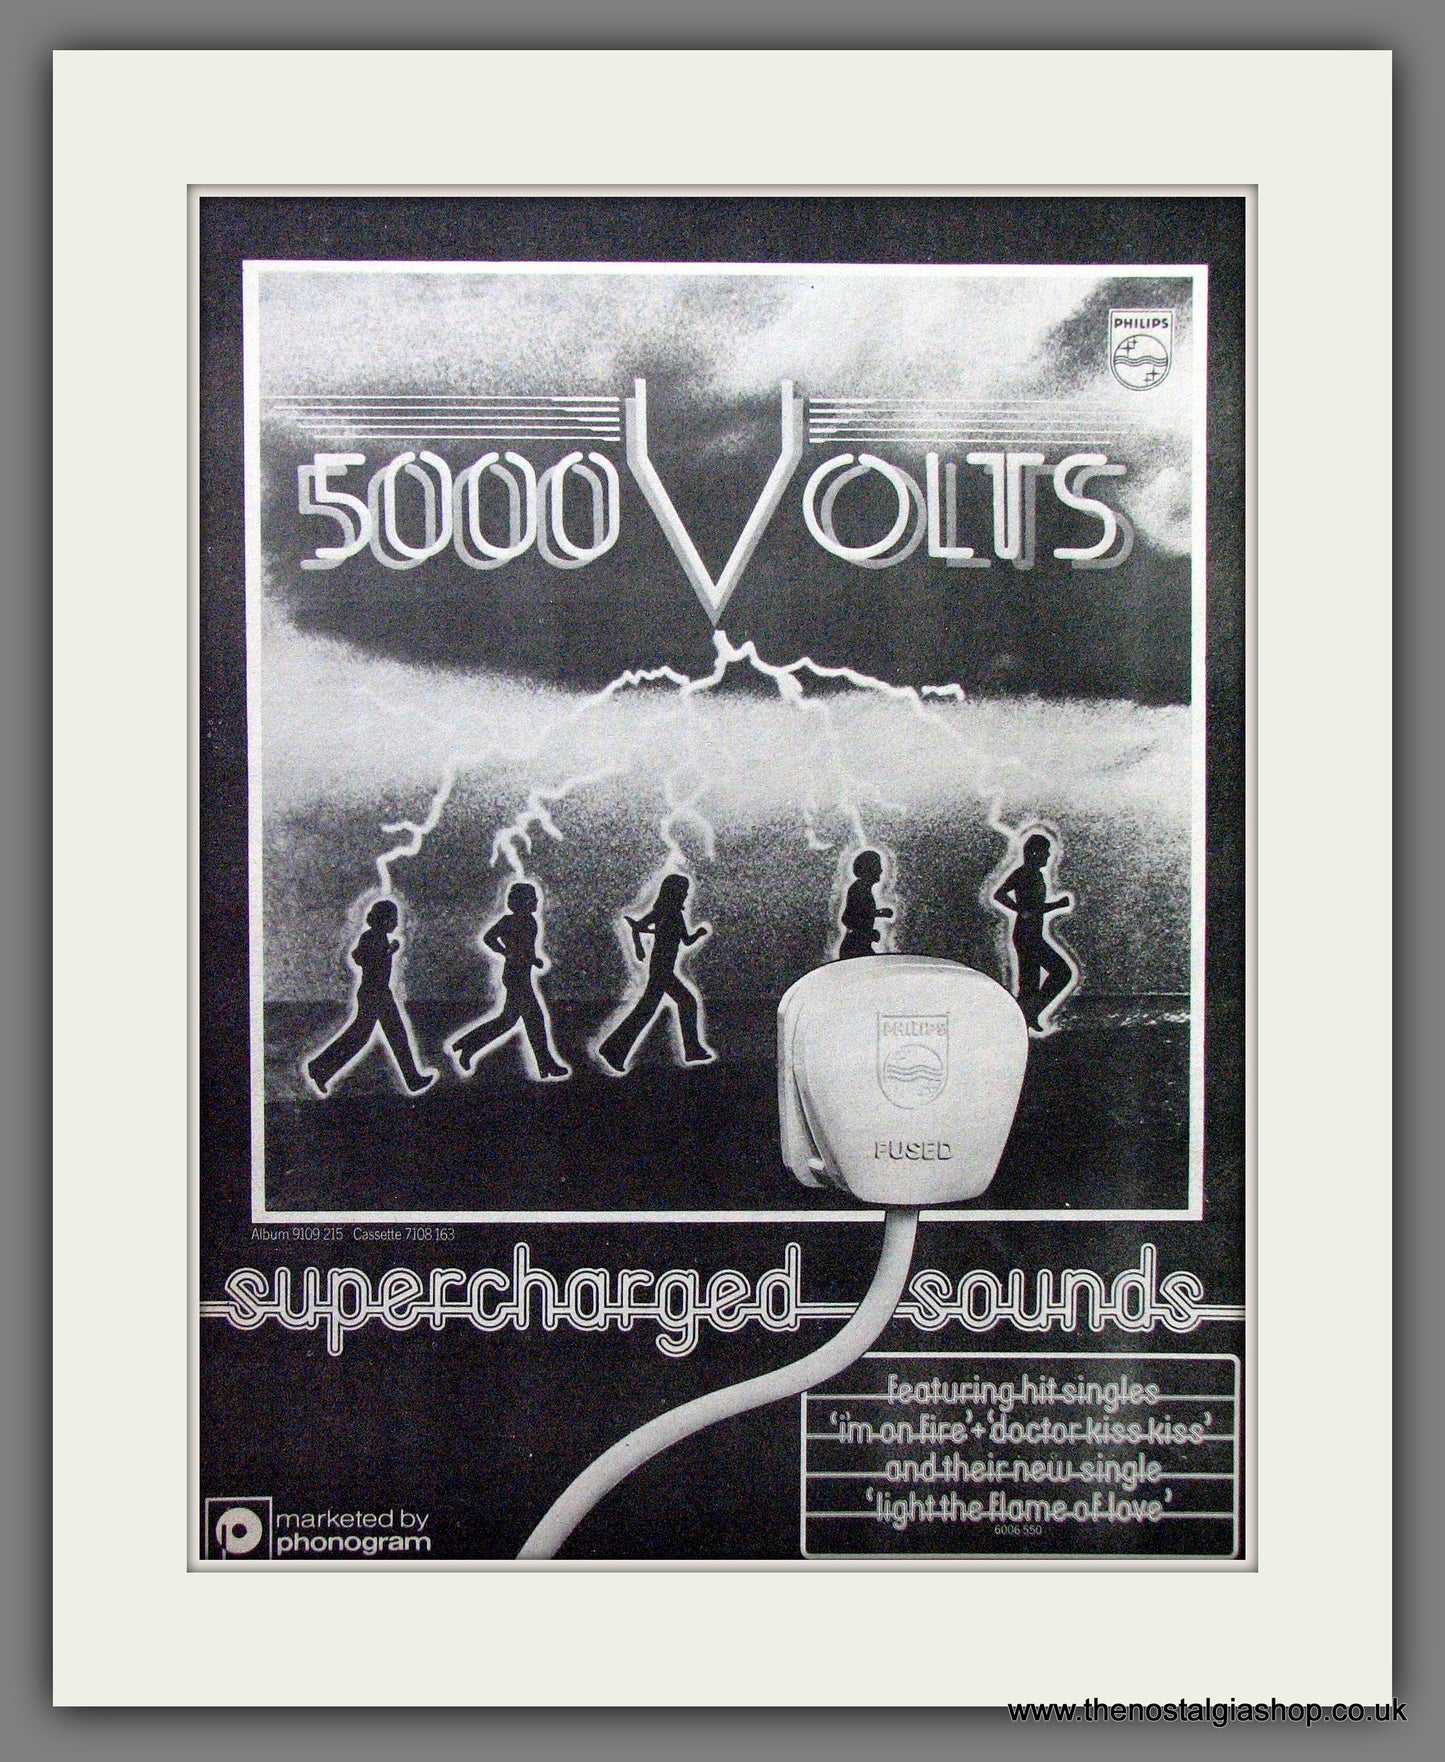 5000 Volts Light The Flame Of Love. Original Advert 1976 (ref AD13018)